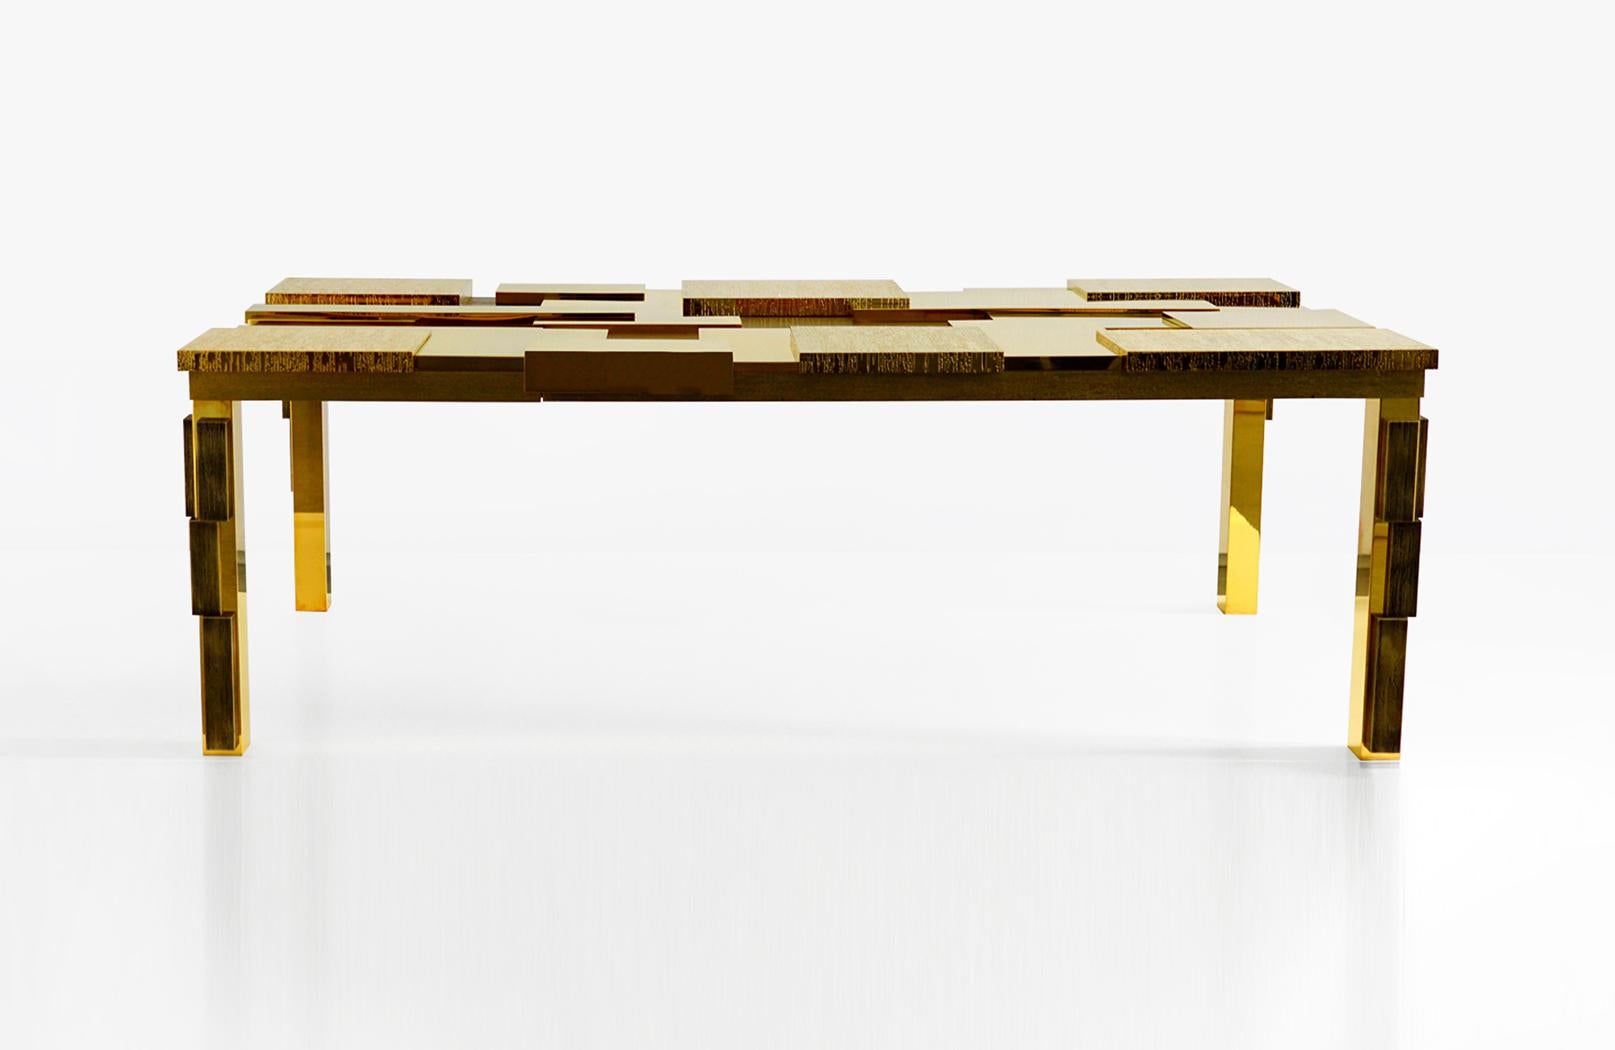 Modern Garrido Cuspid Rectangular Coffee Table in 24K Yellow Gold and Bronze Finish For Sale